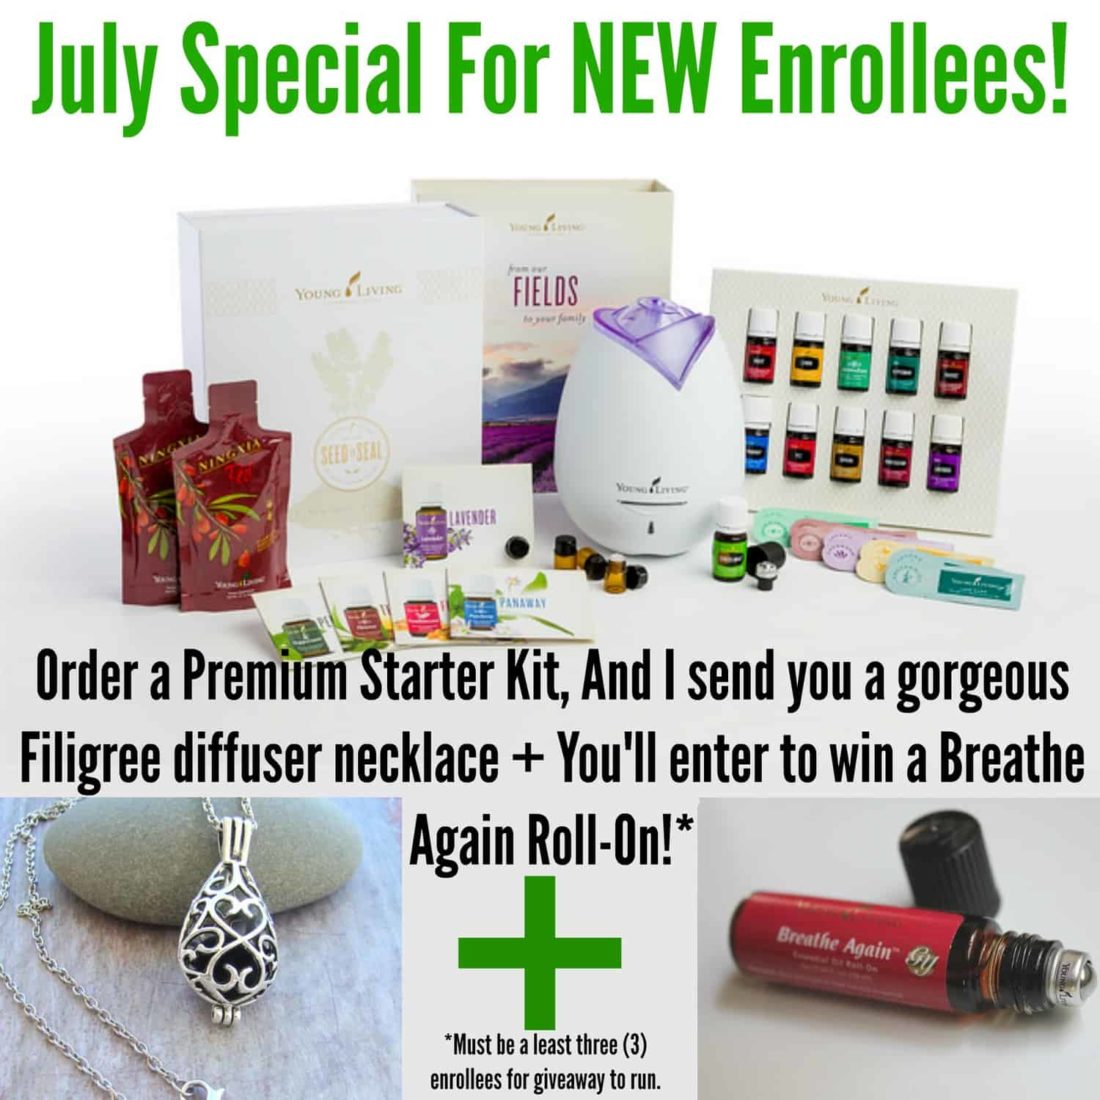 Awesome Promotional for New Young Living Enrollees!